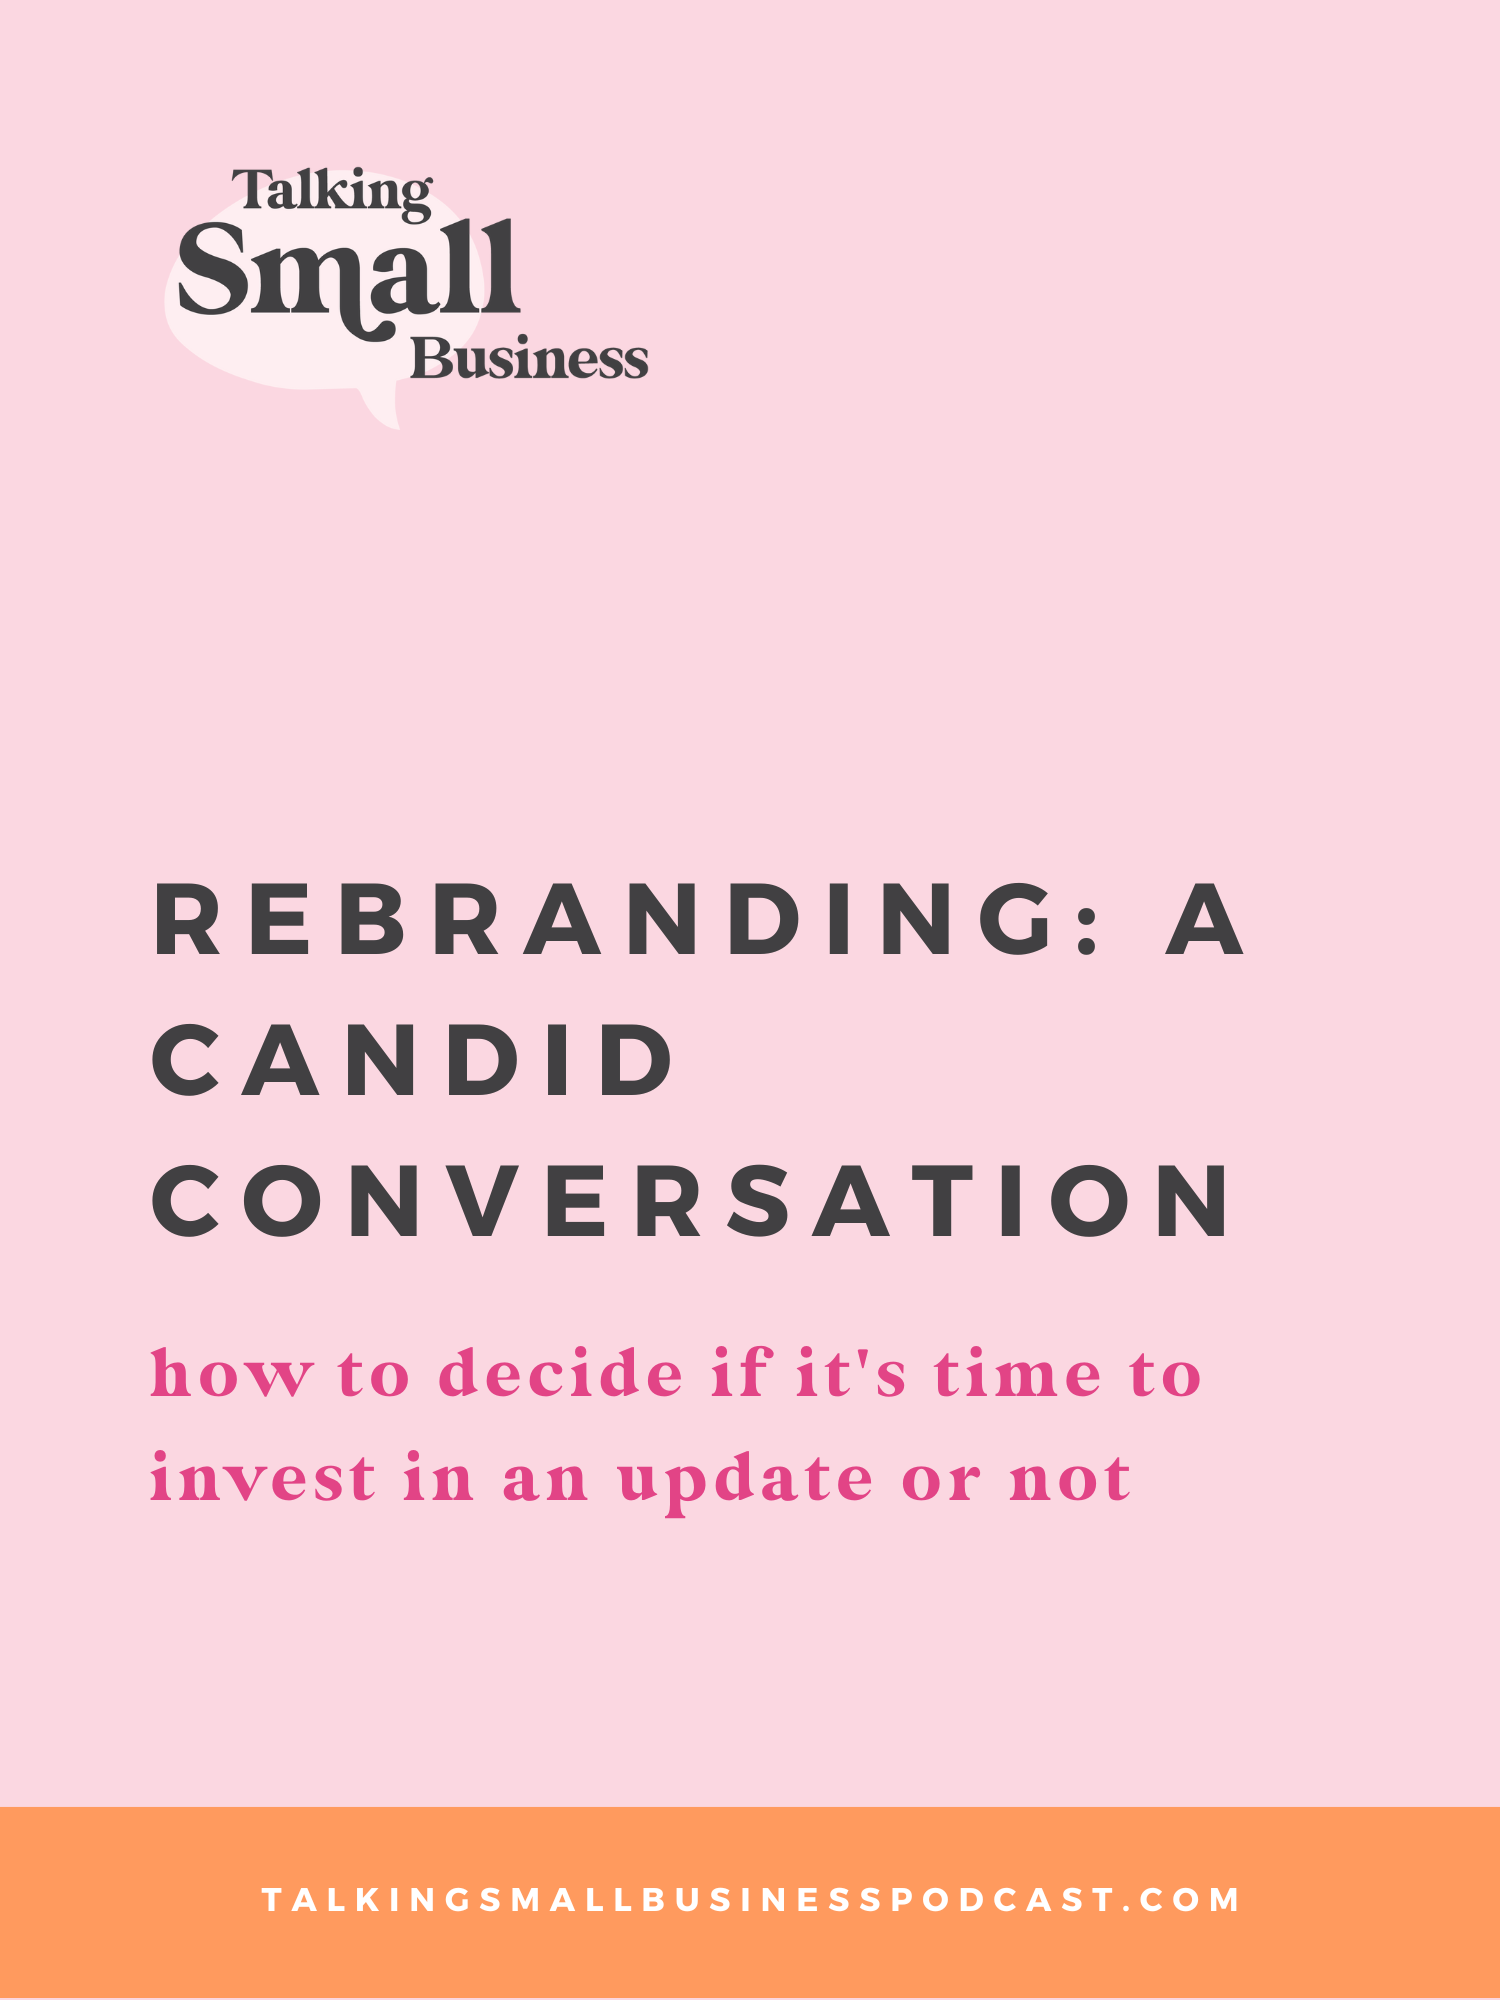 Rebranding: A candid conversation with Kat Schmoyer and Megan Martin about how to decide if rebranding is the right decision for your biz